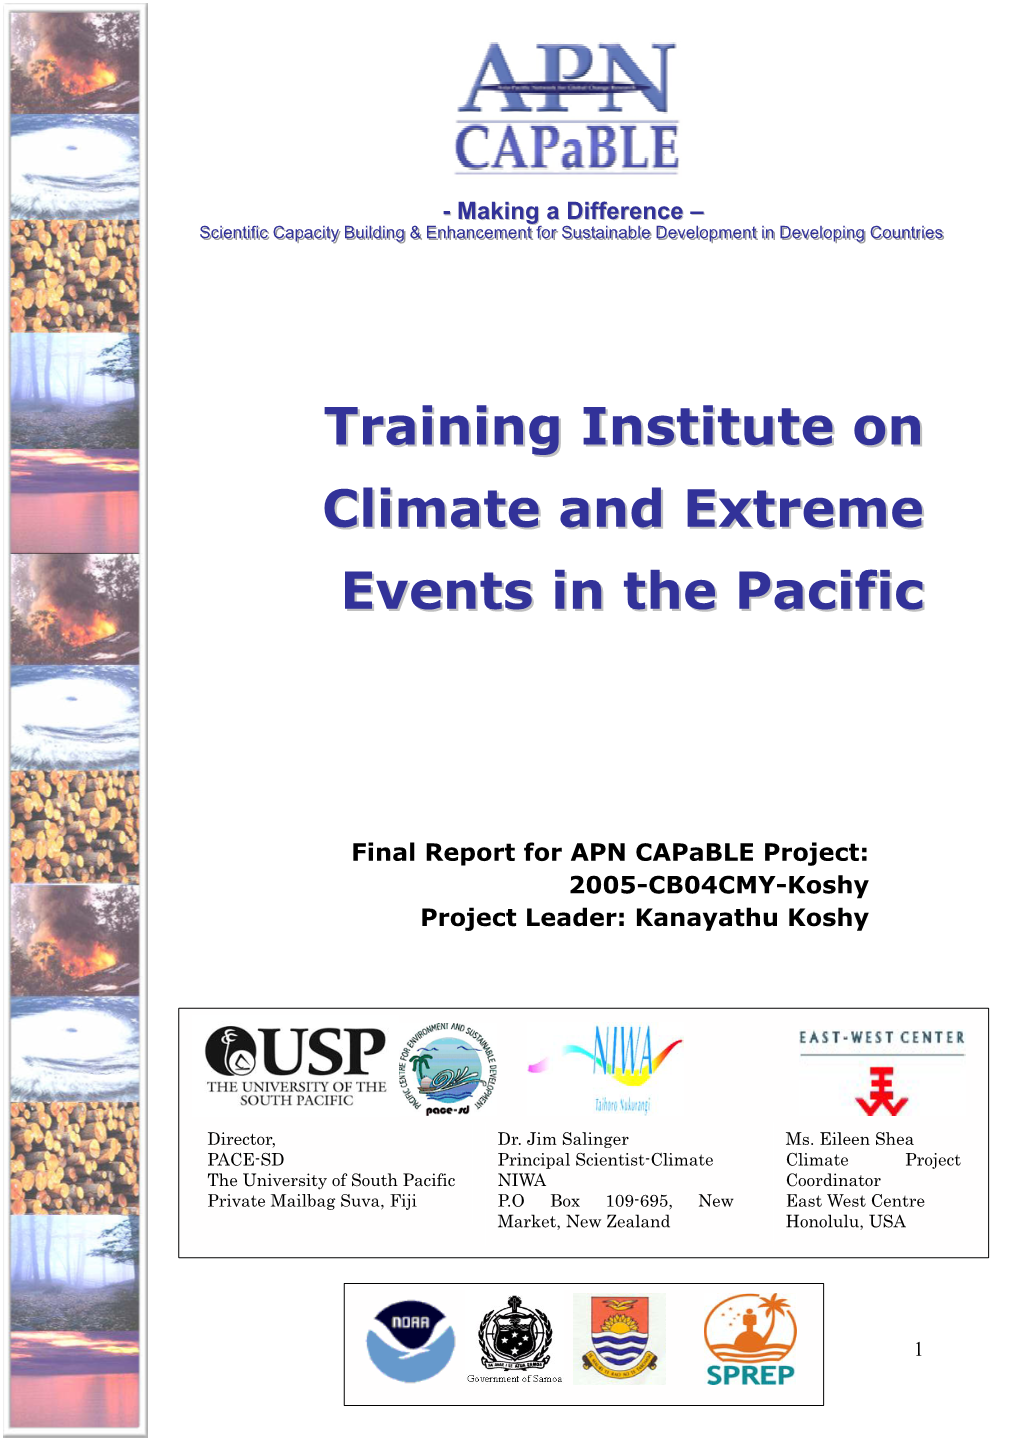 Training Institute on Climate and Extreme Events in the Pacific